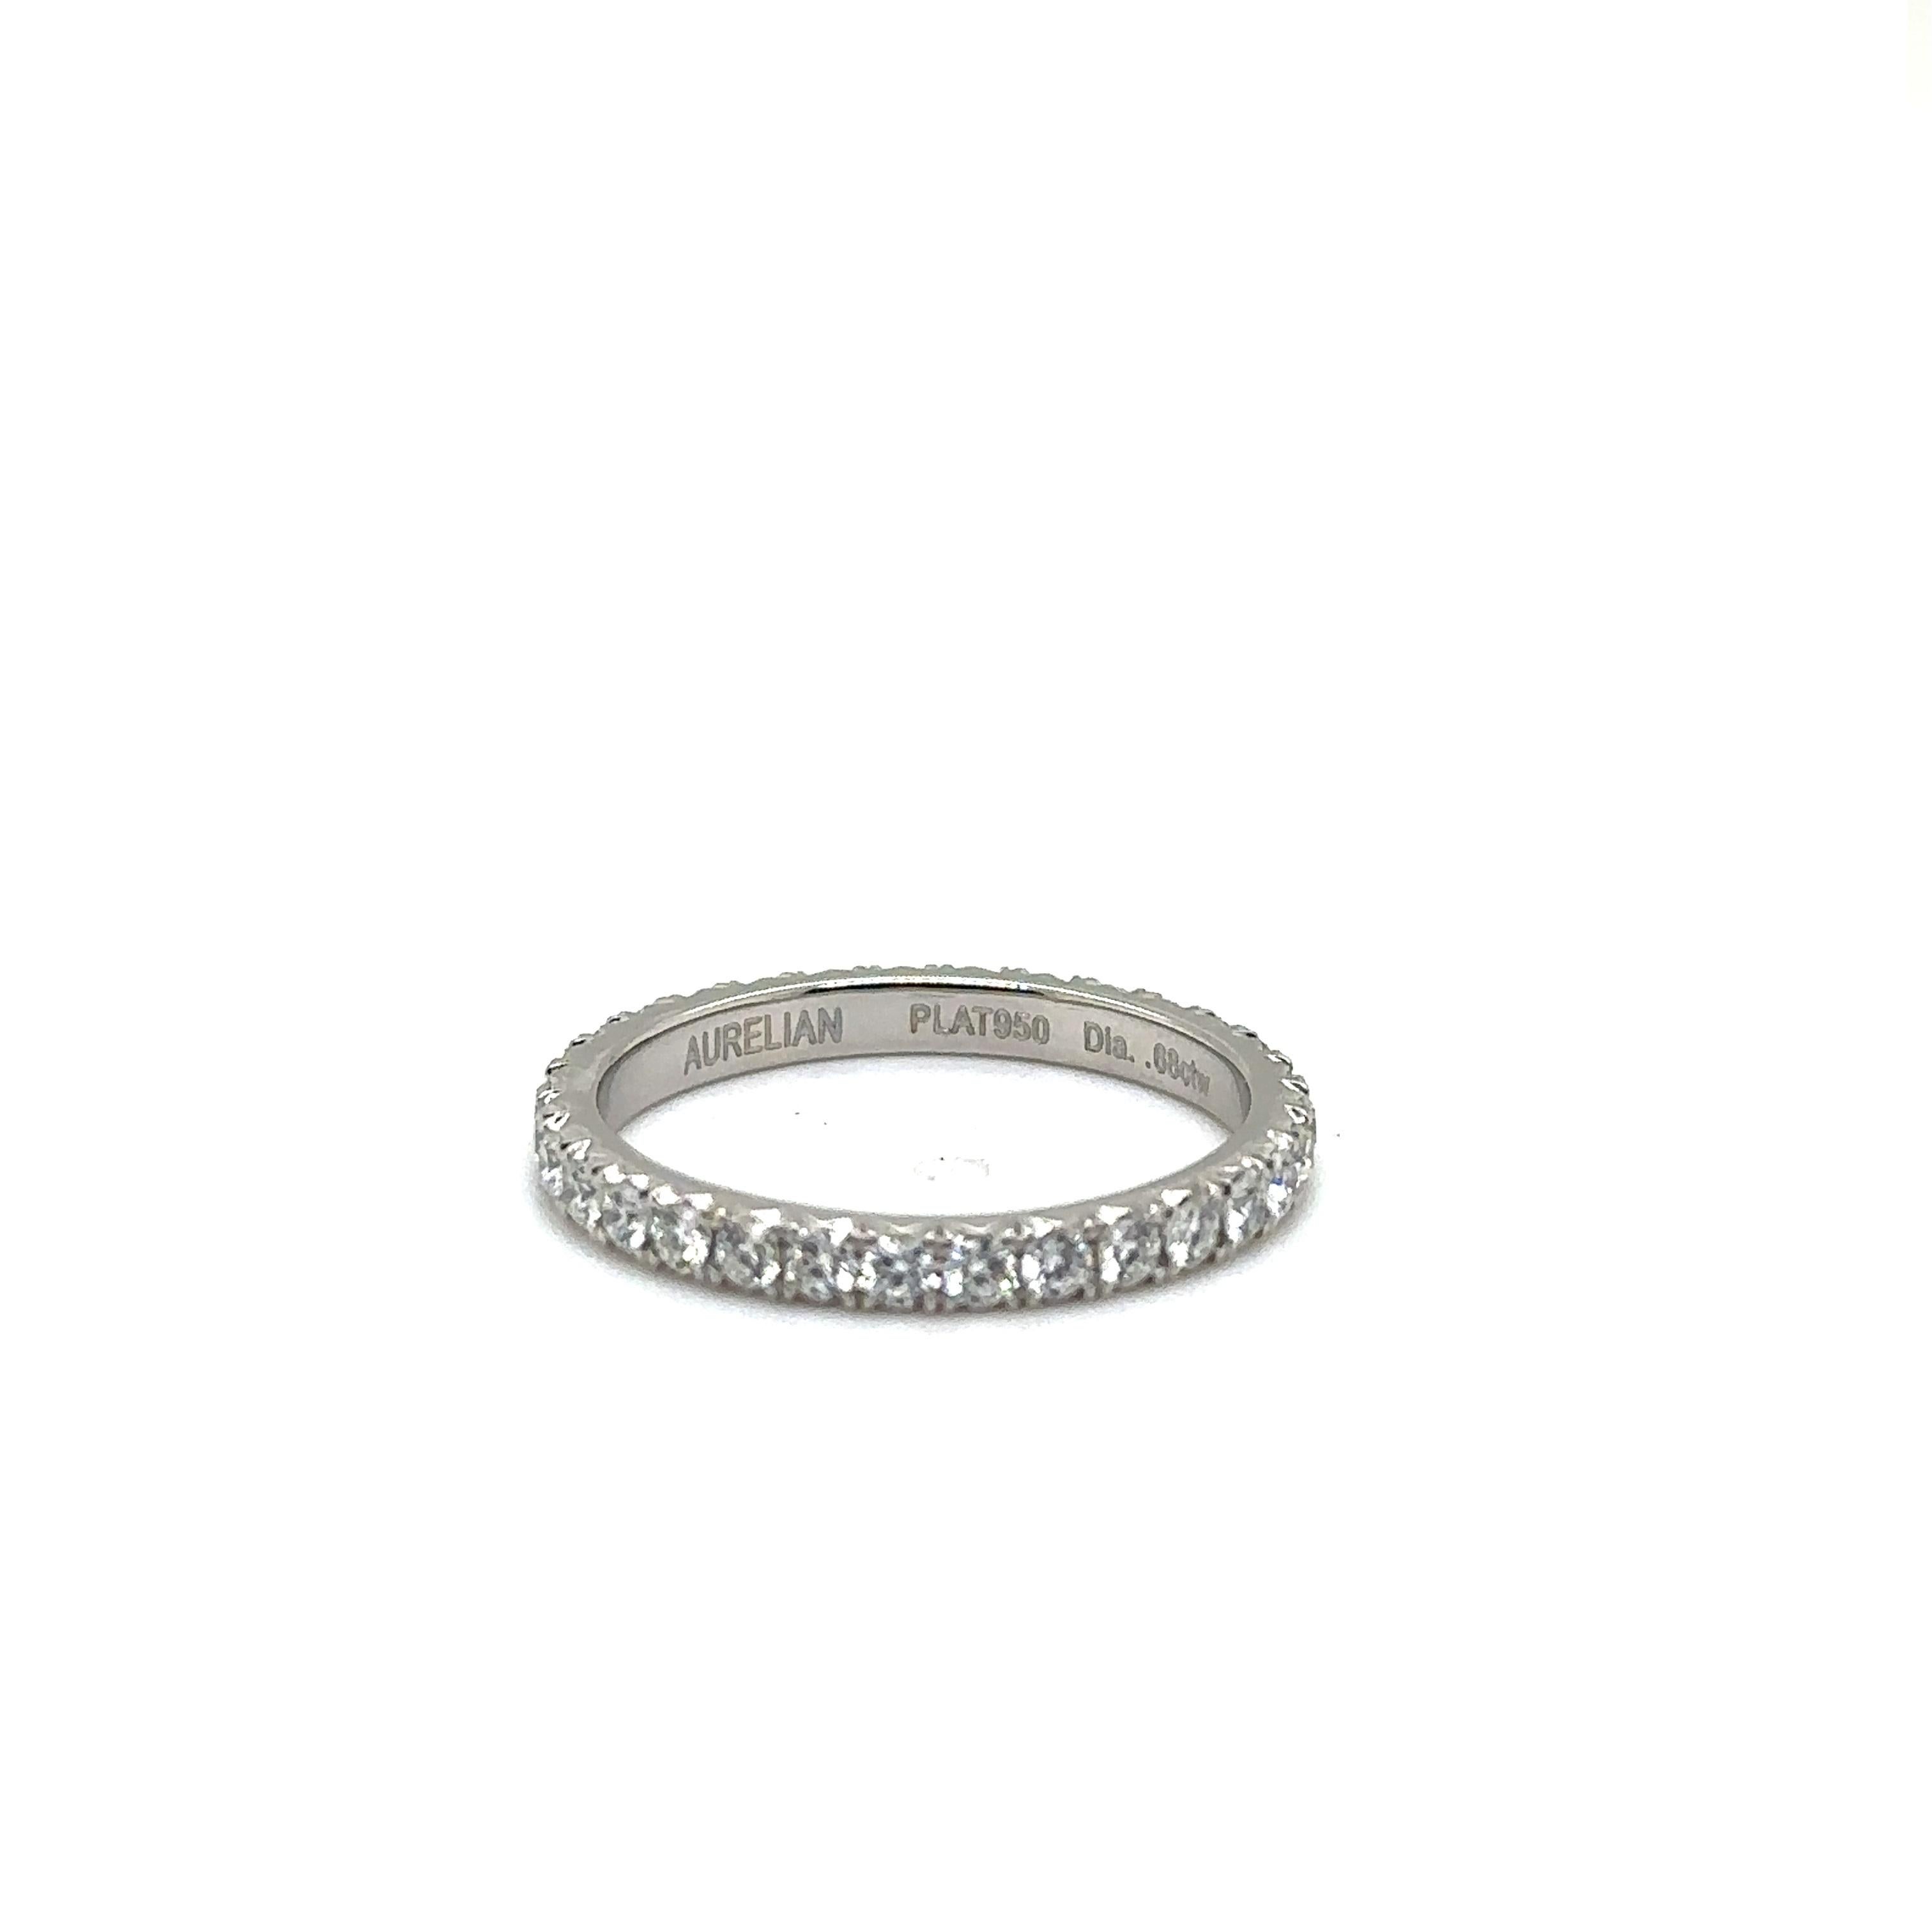 WB31 PLAT - PLATINUM WEDDING BAND with 0.68 CWT DIAMONDS For Sale 3